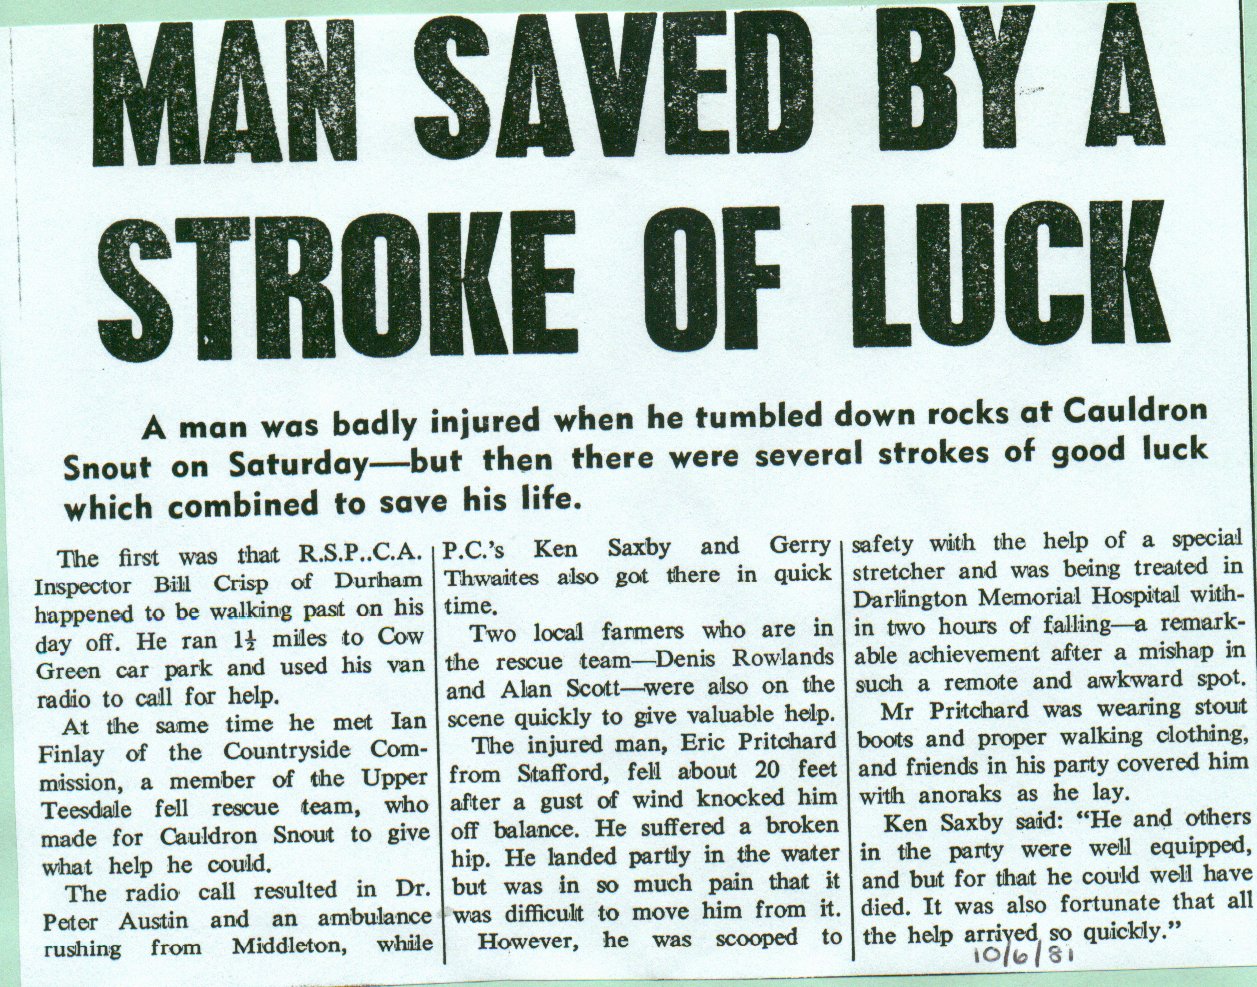  Man saved by stroke of luck

Cauldron Snout, Tees, Bill Crisp, Ian Findlay, Eric Pritchard, callout, successful